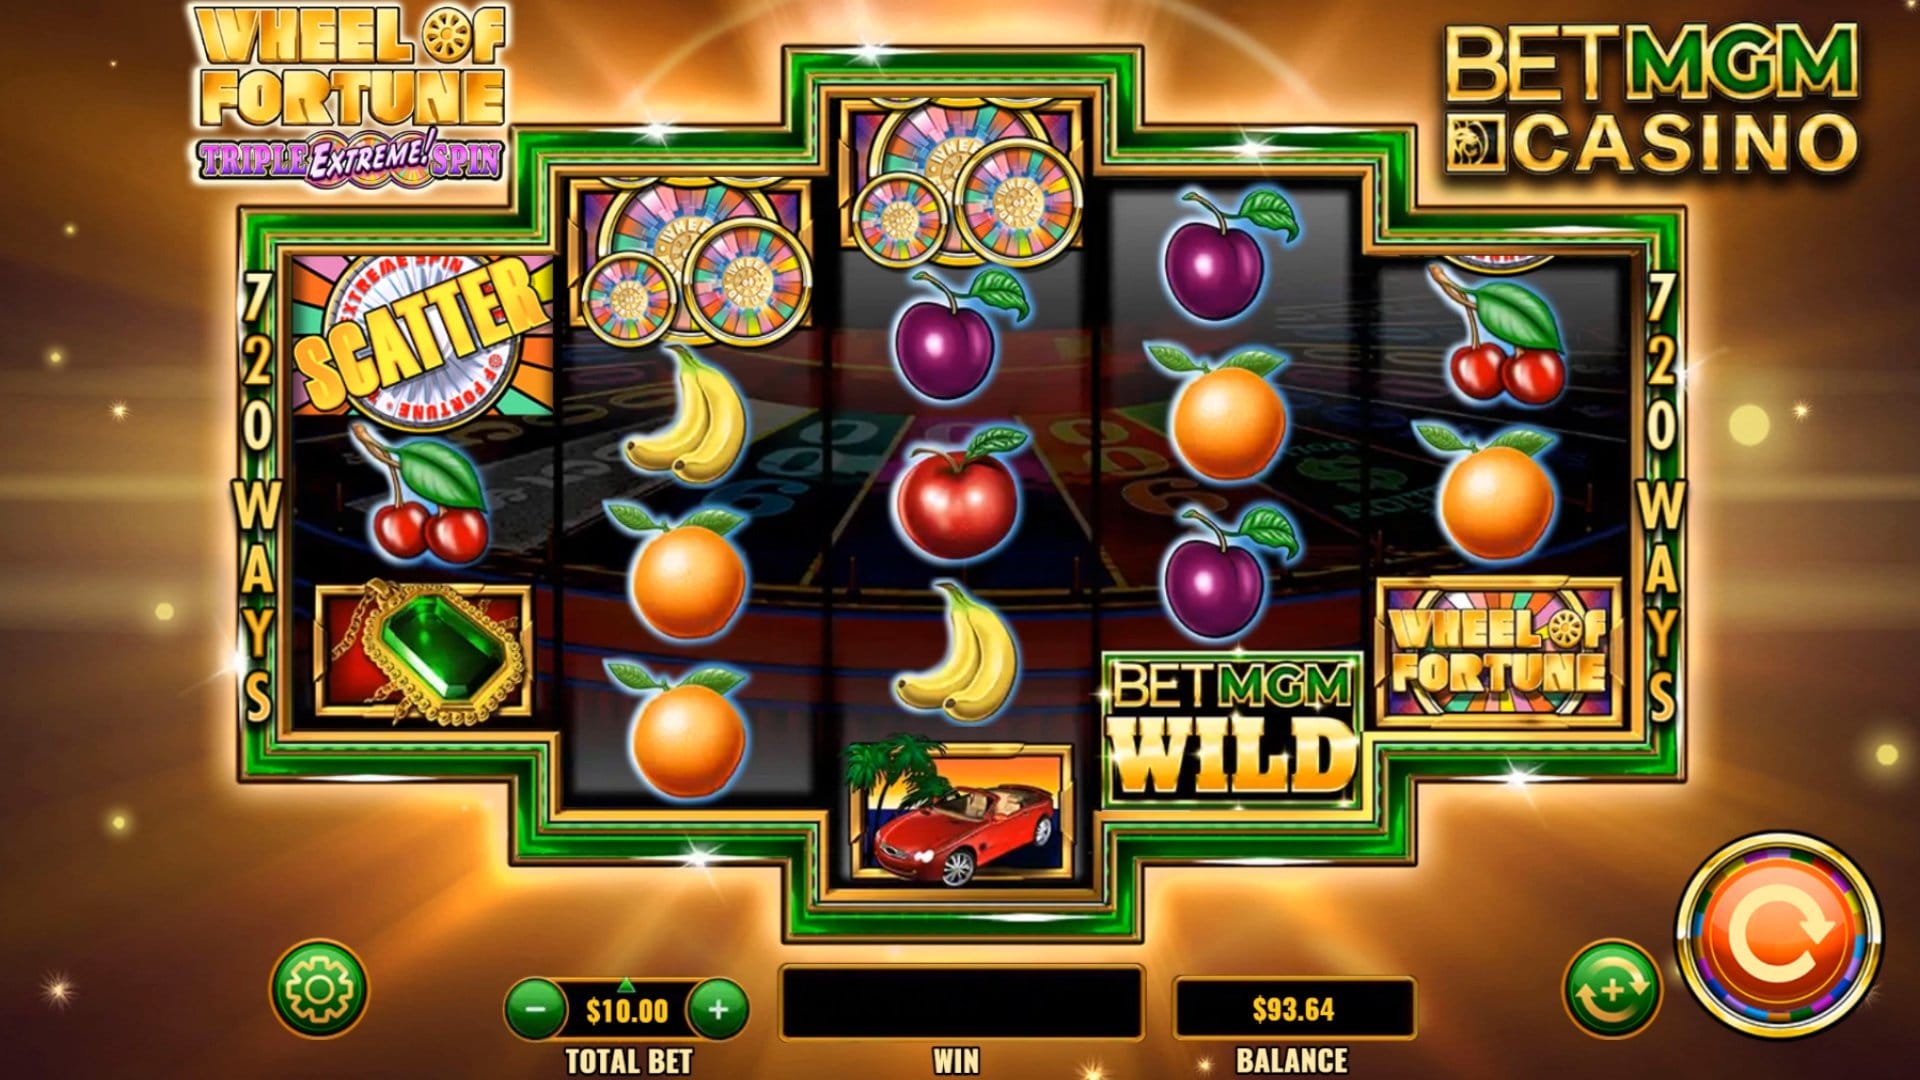 BetMGM Wheel of Fortune Triple Extreme Spin game.